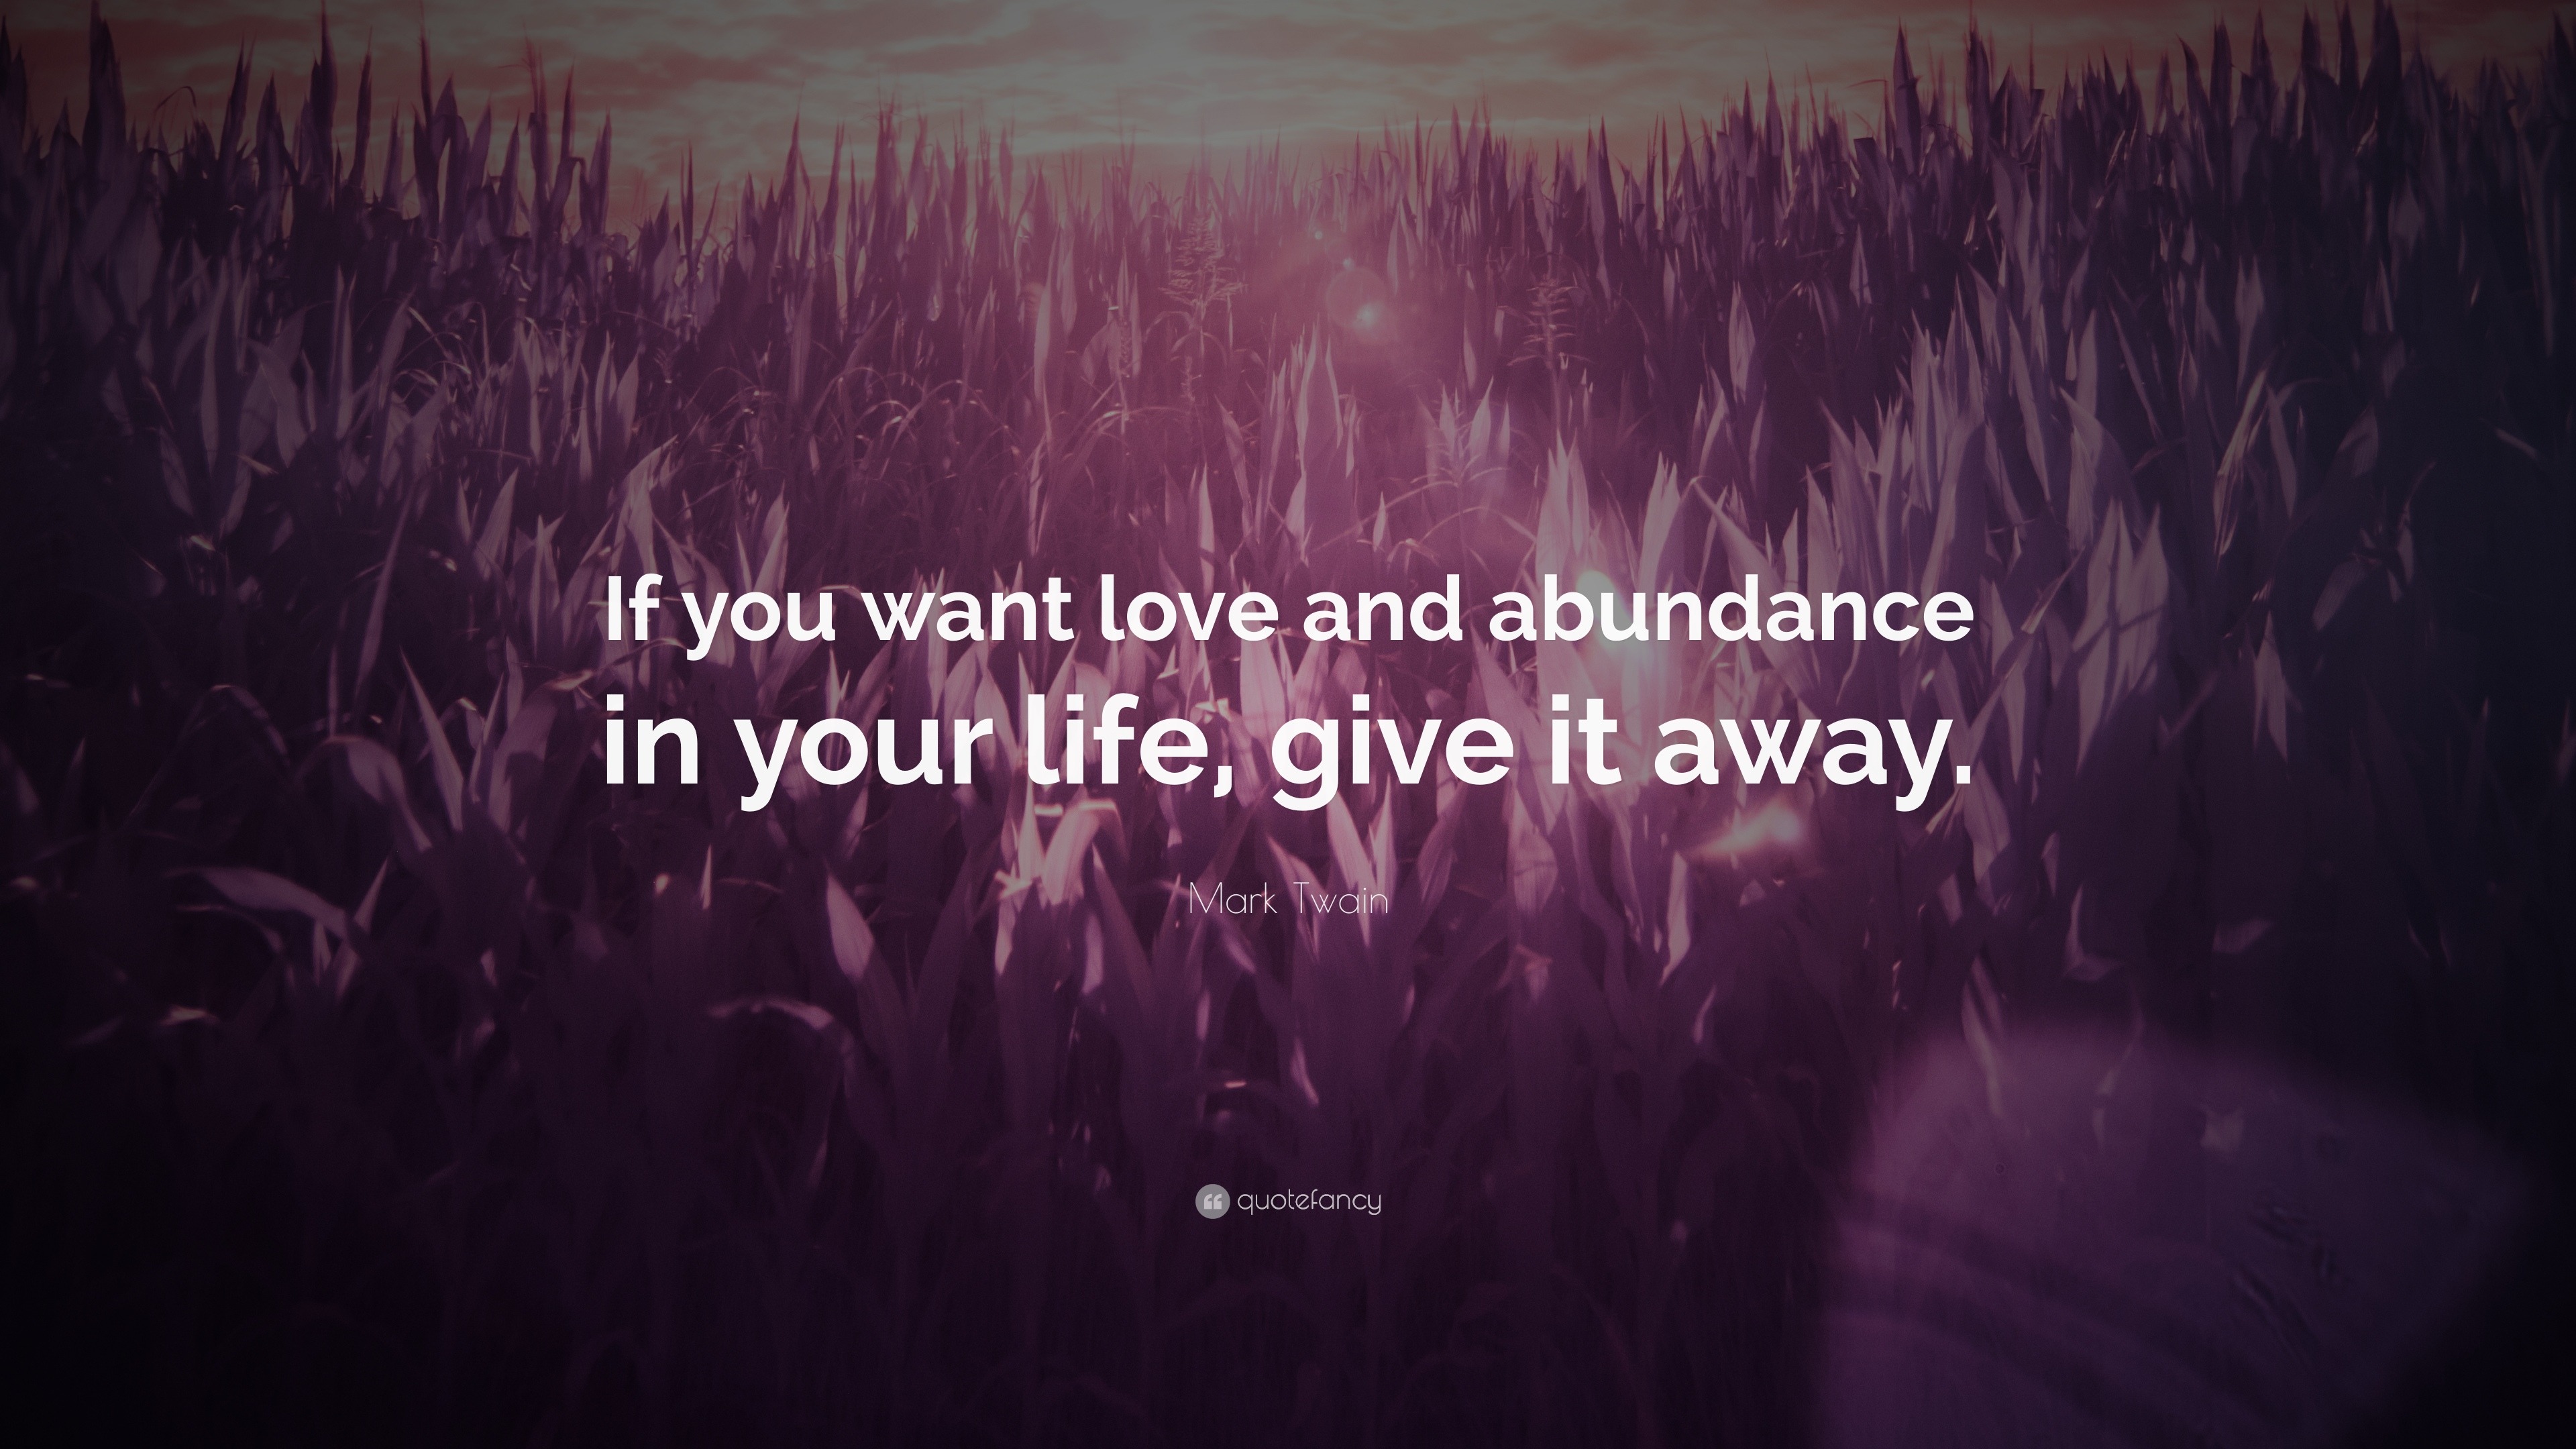 Mark Twain Quote “If you want love and abundance in your life give